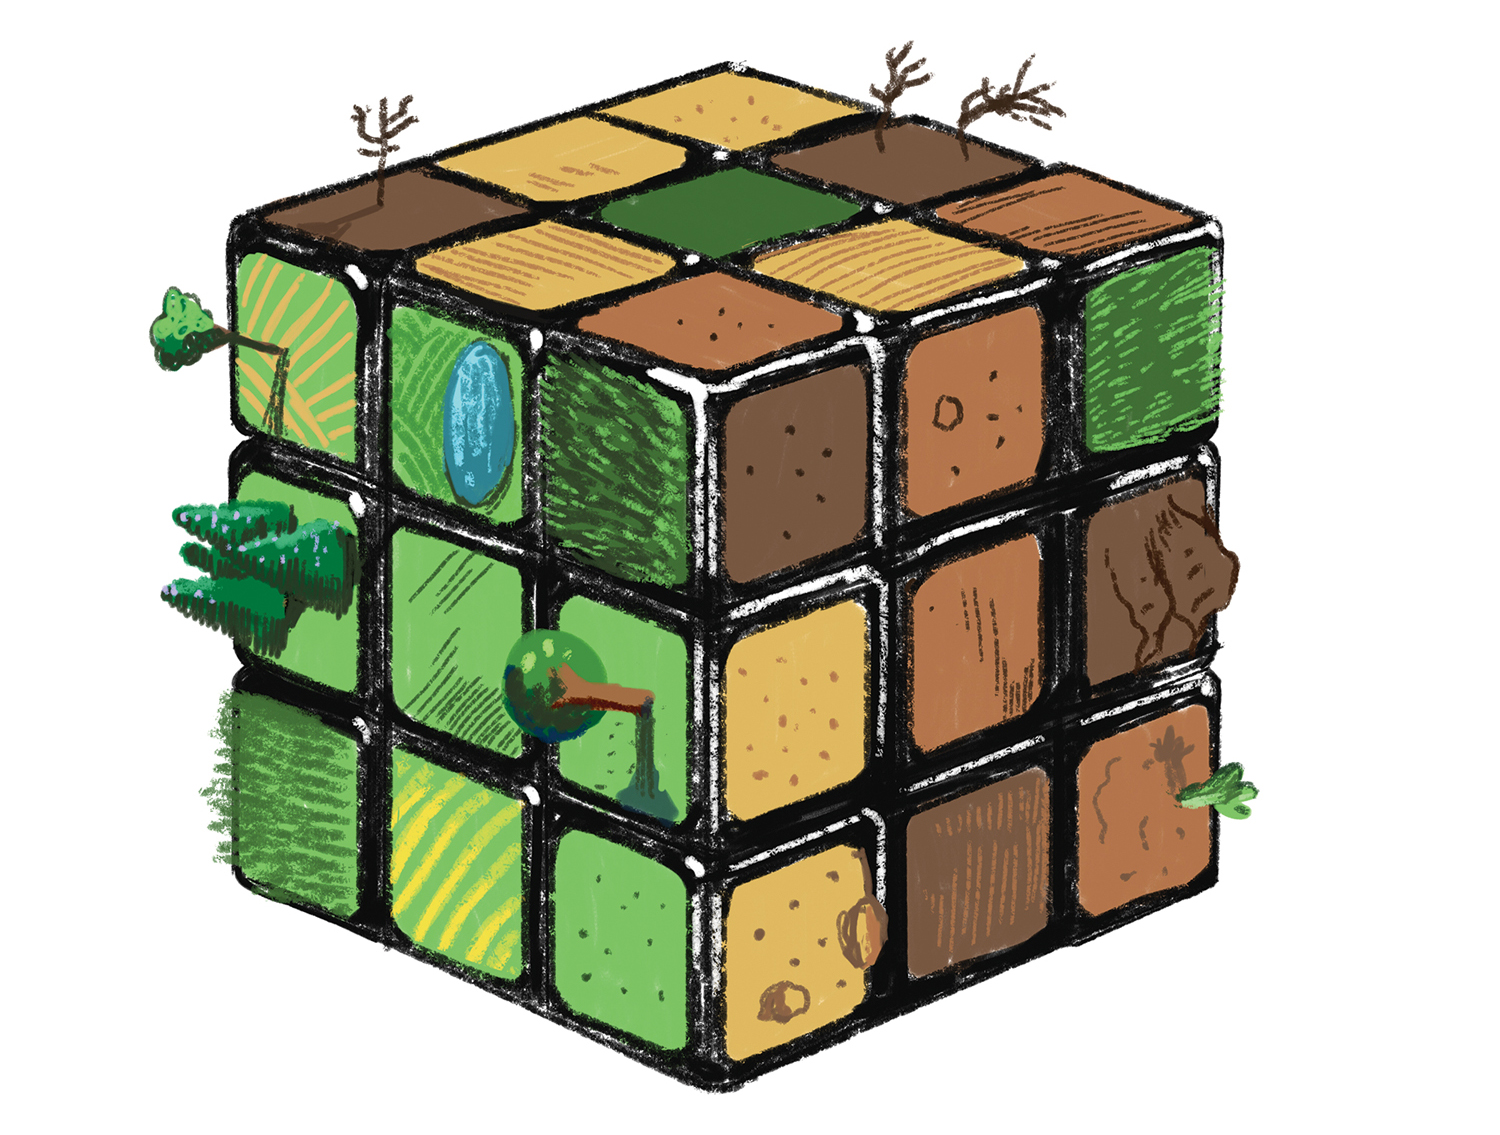 An illustration of an earth-colored Rubik's cube with trees, grass and dirt on its surface. 